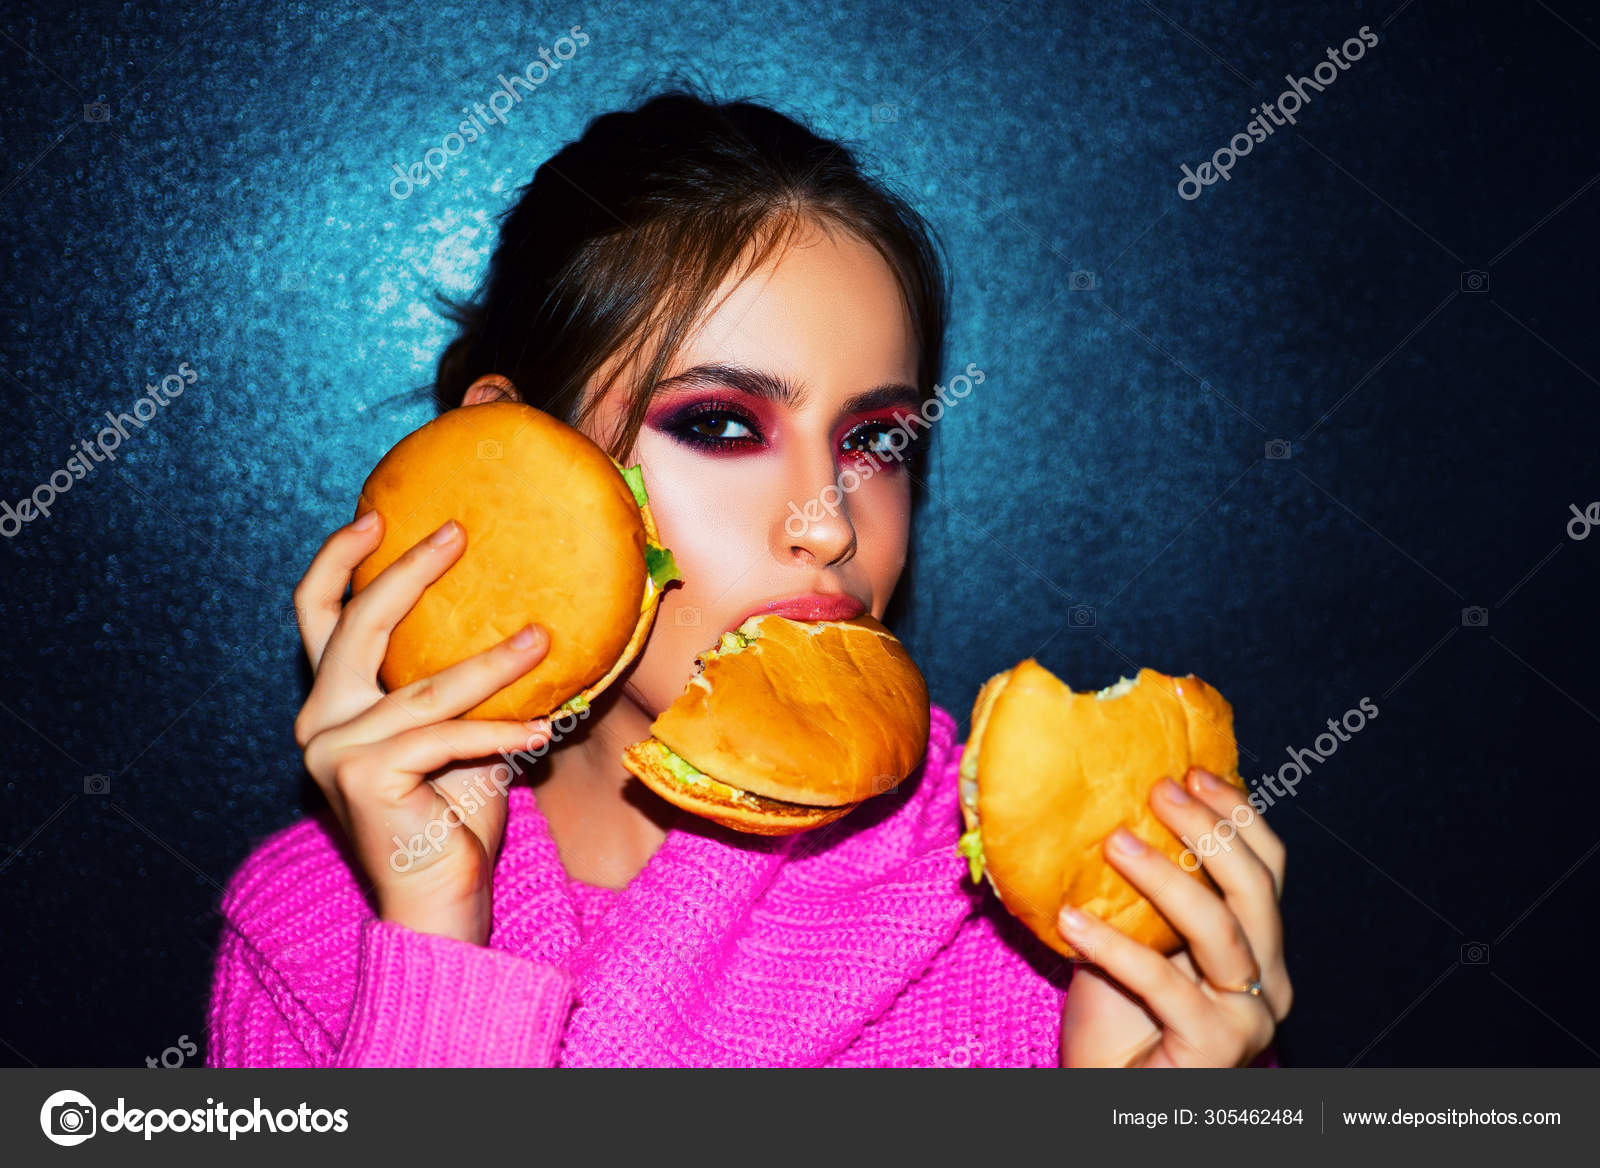 Perfect Girl Download - Fashion, beauty.Sexy woman with perfect makeup eating hamburgers. Female  beauty visage concept. Stock Photo by Â©Tverdohlib.com 305462484